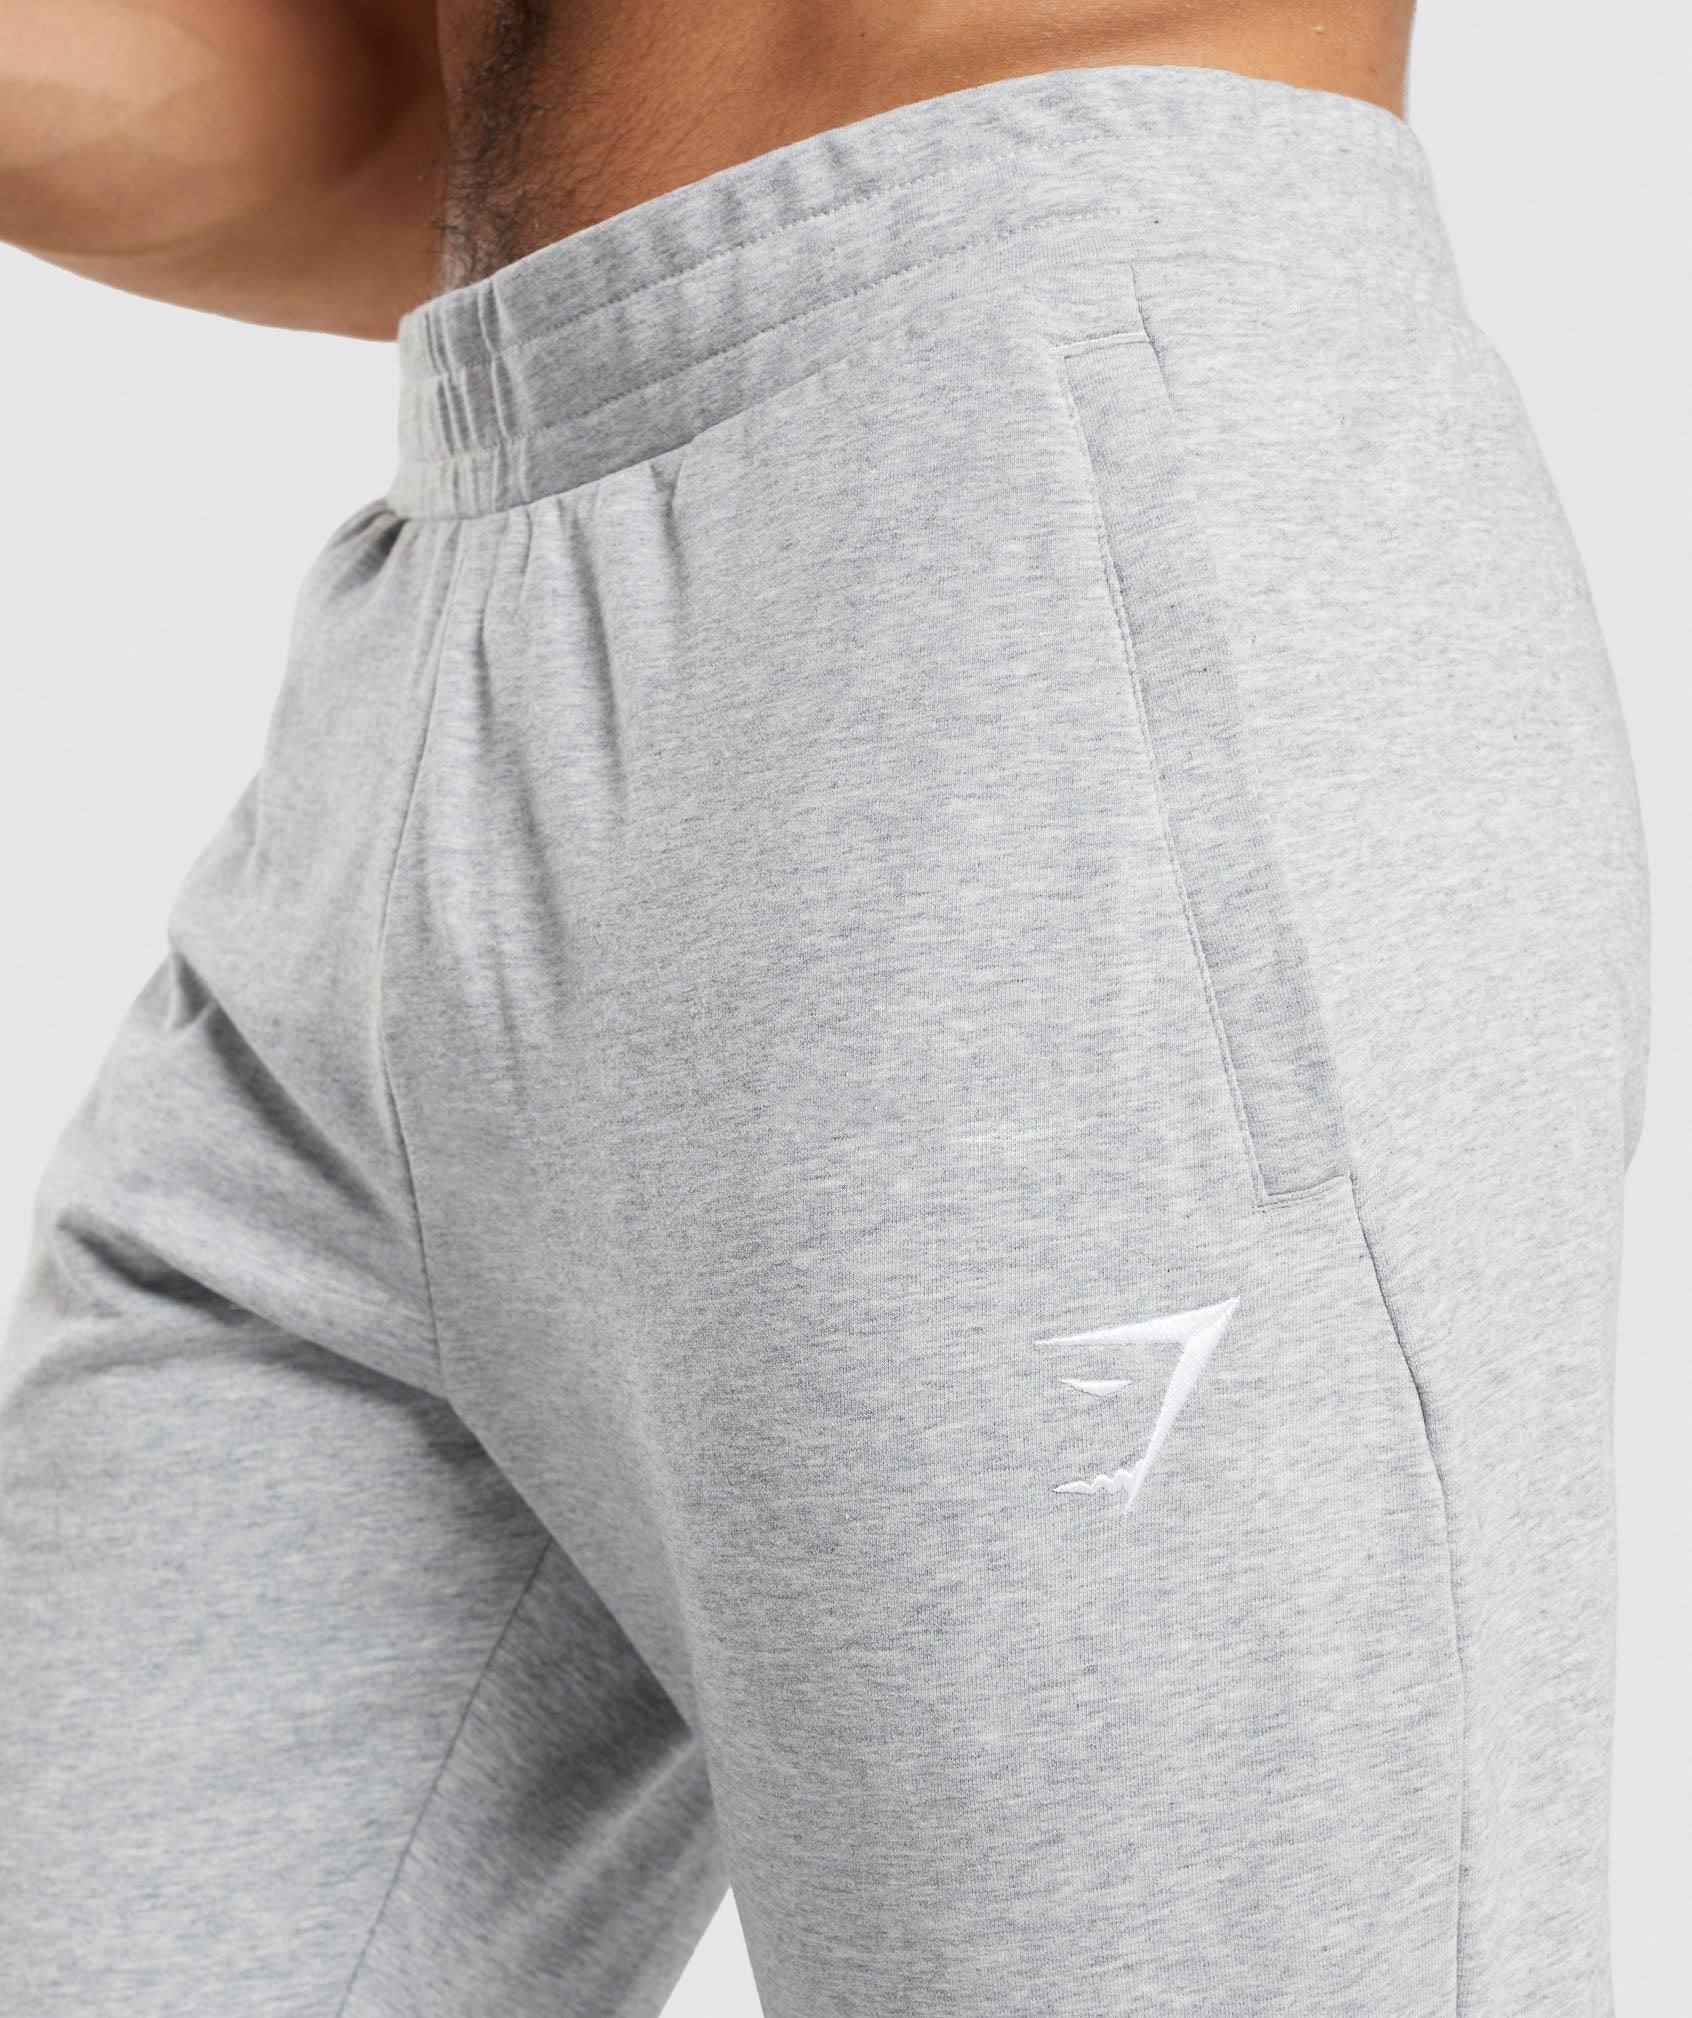 Critical 2.0 Joggers in Light Grey Marl